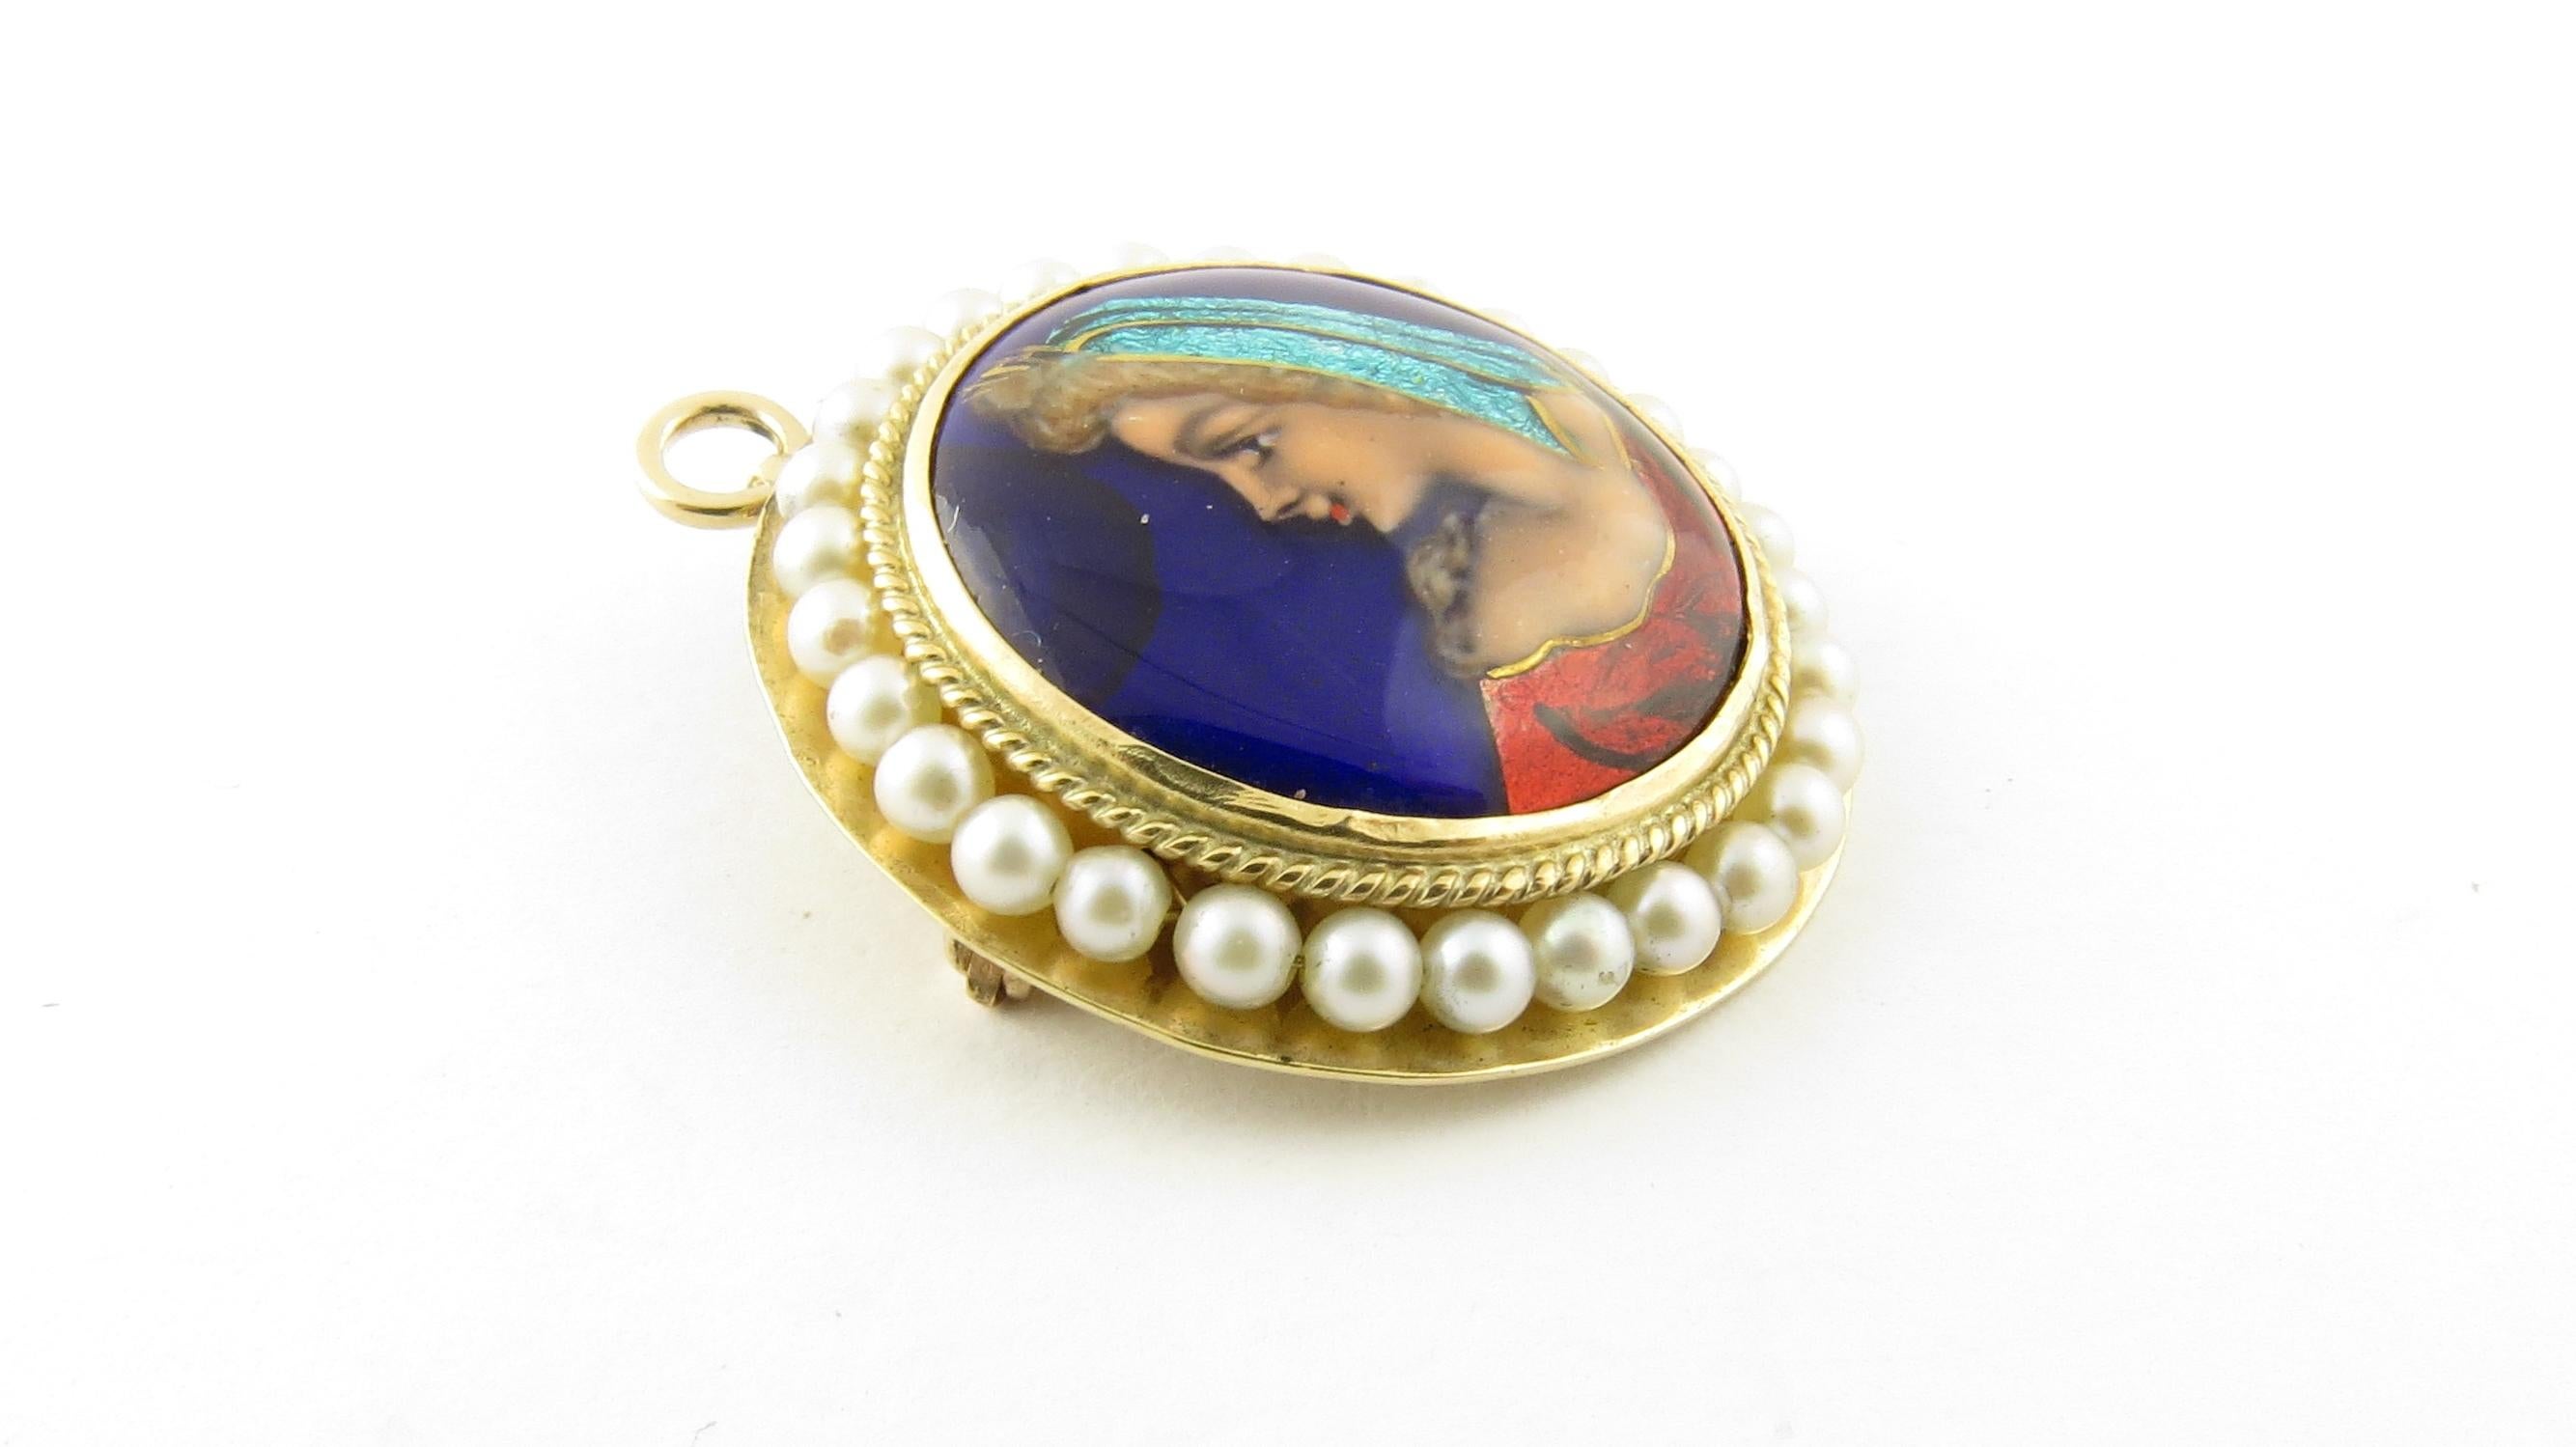 Women's Vintage 14 Karat Yellow Gold and Seed Pearl Painted Cameo Pendant / Brooch #4384